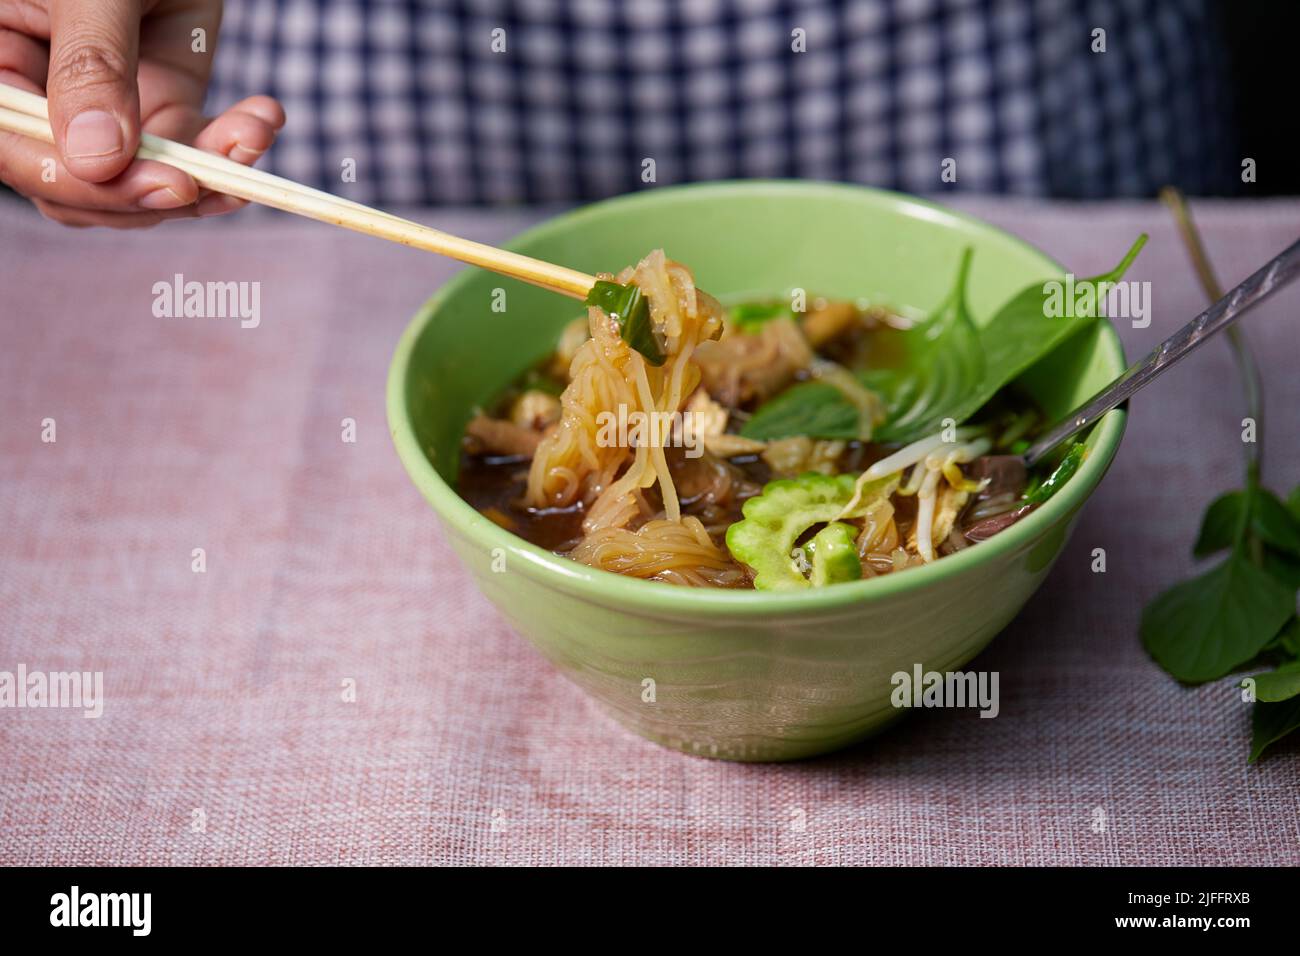 woman hand uses chopsticks to pickup rice stick noodles on table Stock Photo